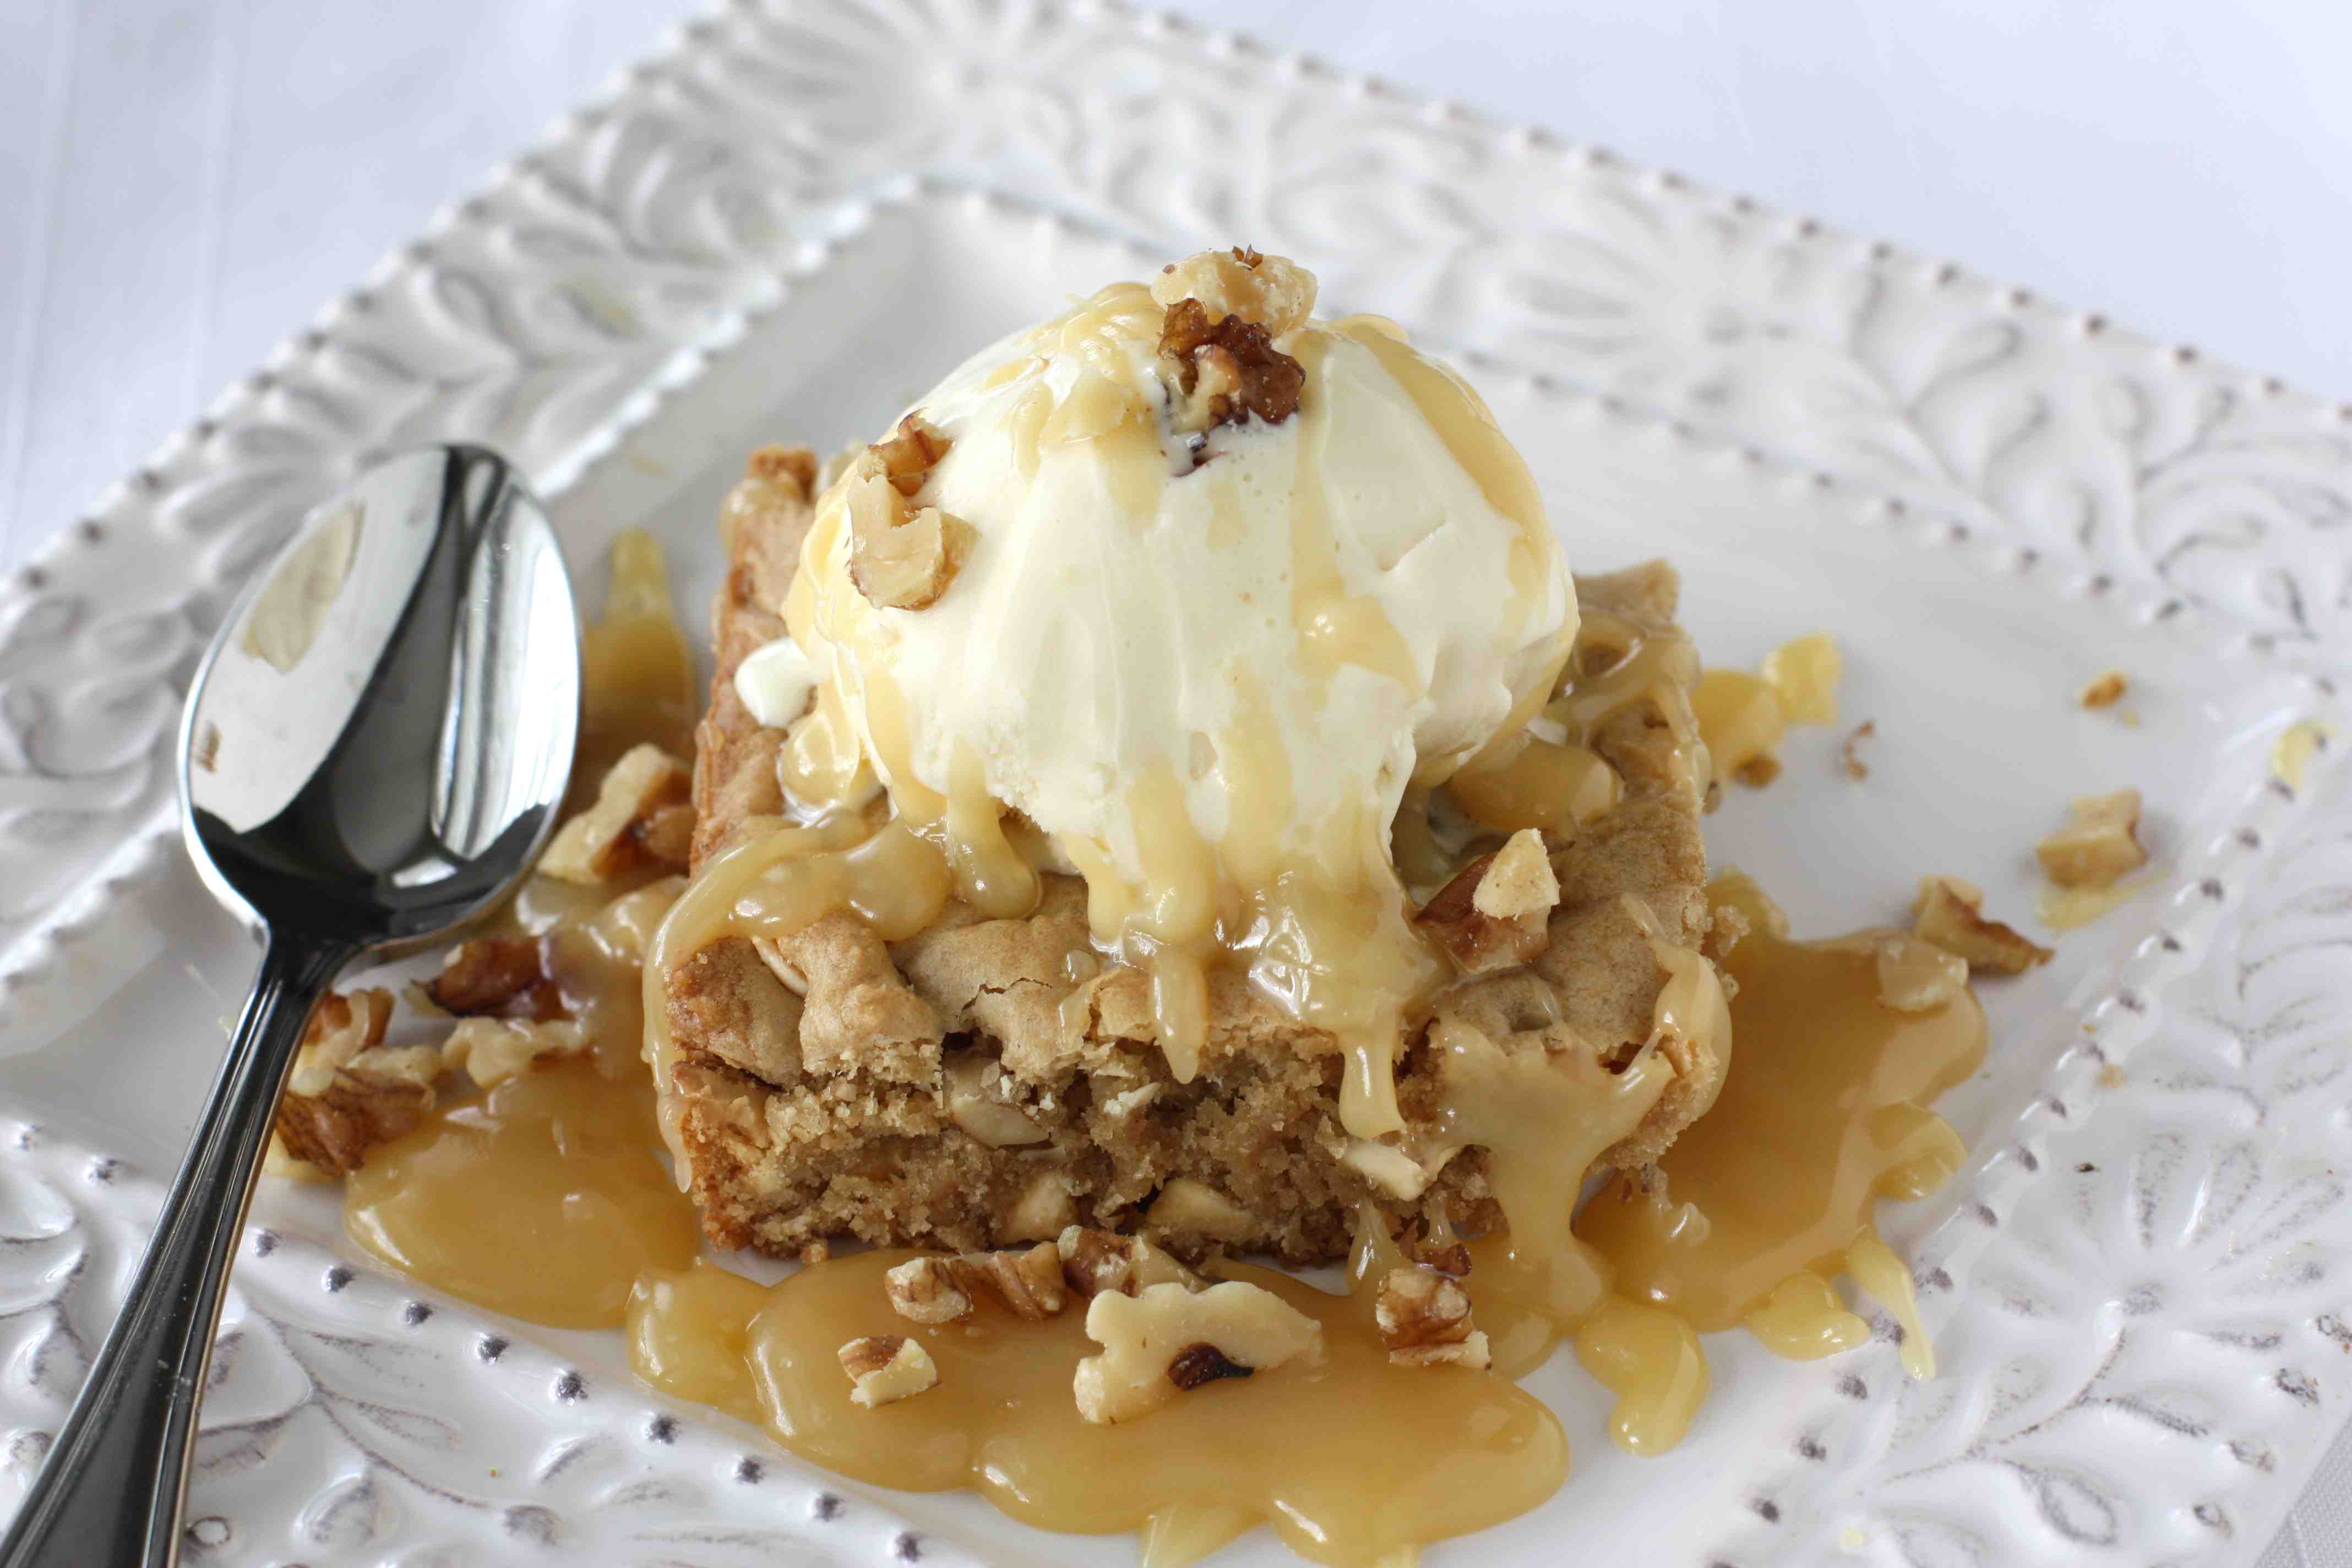 Tasty Kitchen Blog: White Chocolate Walnut Blondies with Maple Butter Sauce. Guest post by Dara Michalski of Cookin' Canuck, recipe submitted by TK member Brandie of The Country Cook.